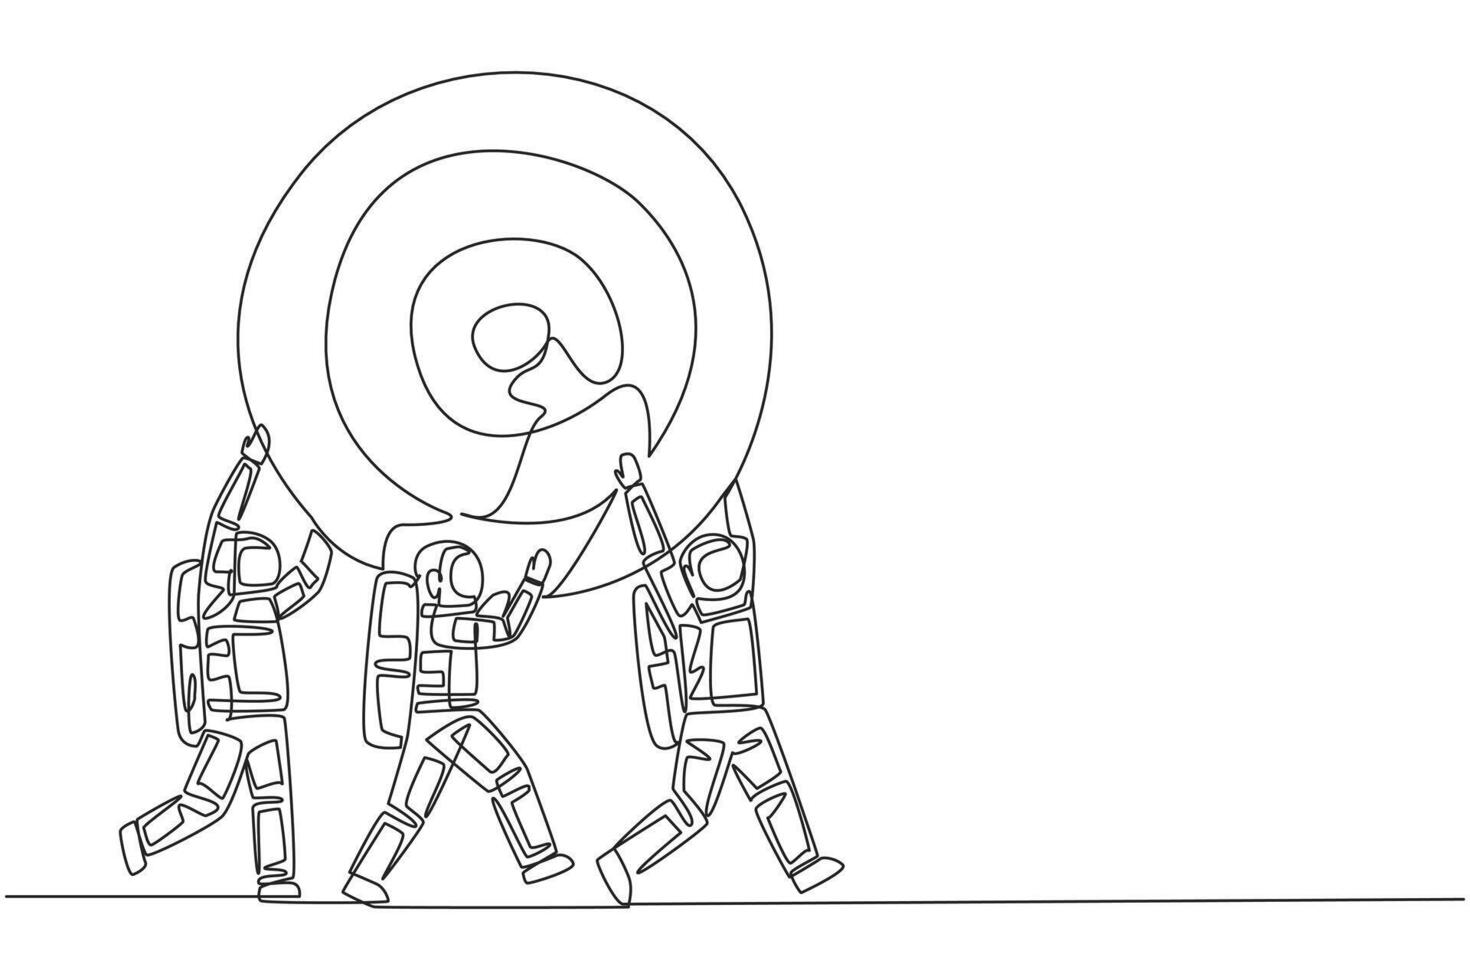 Continuous one line drawing group of astronauts work together carrying arrow target board. Focus on achieving successful space expedition mission. Spaceman. Single line draw design illustration vector